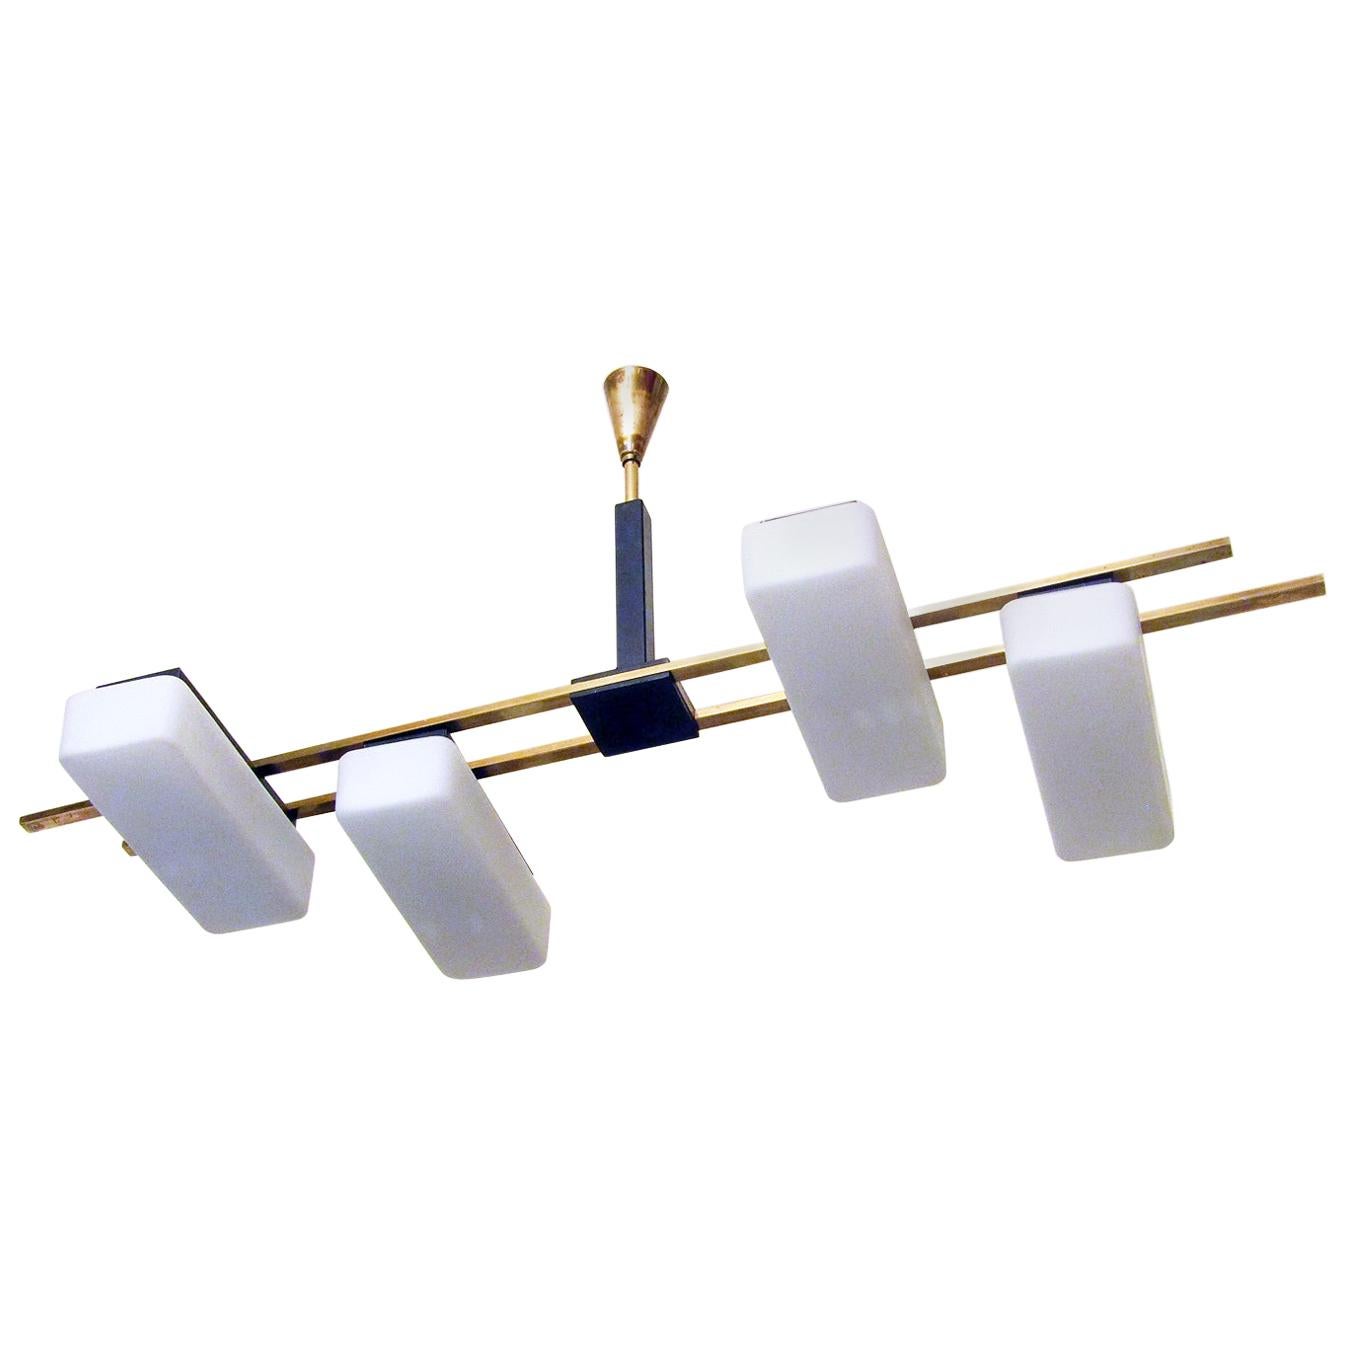 Modernist French 1960s Ceiling Fixture by Maison Arlus